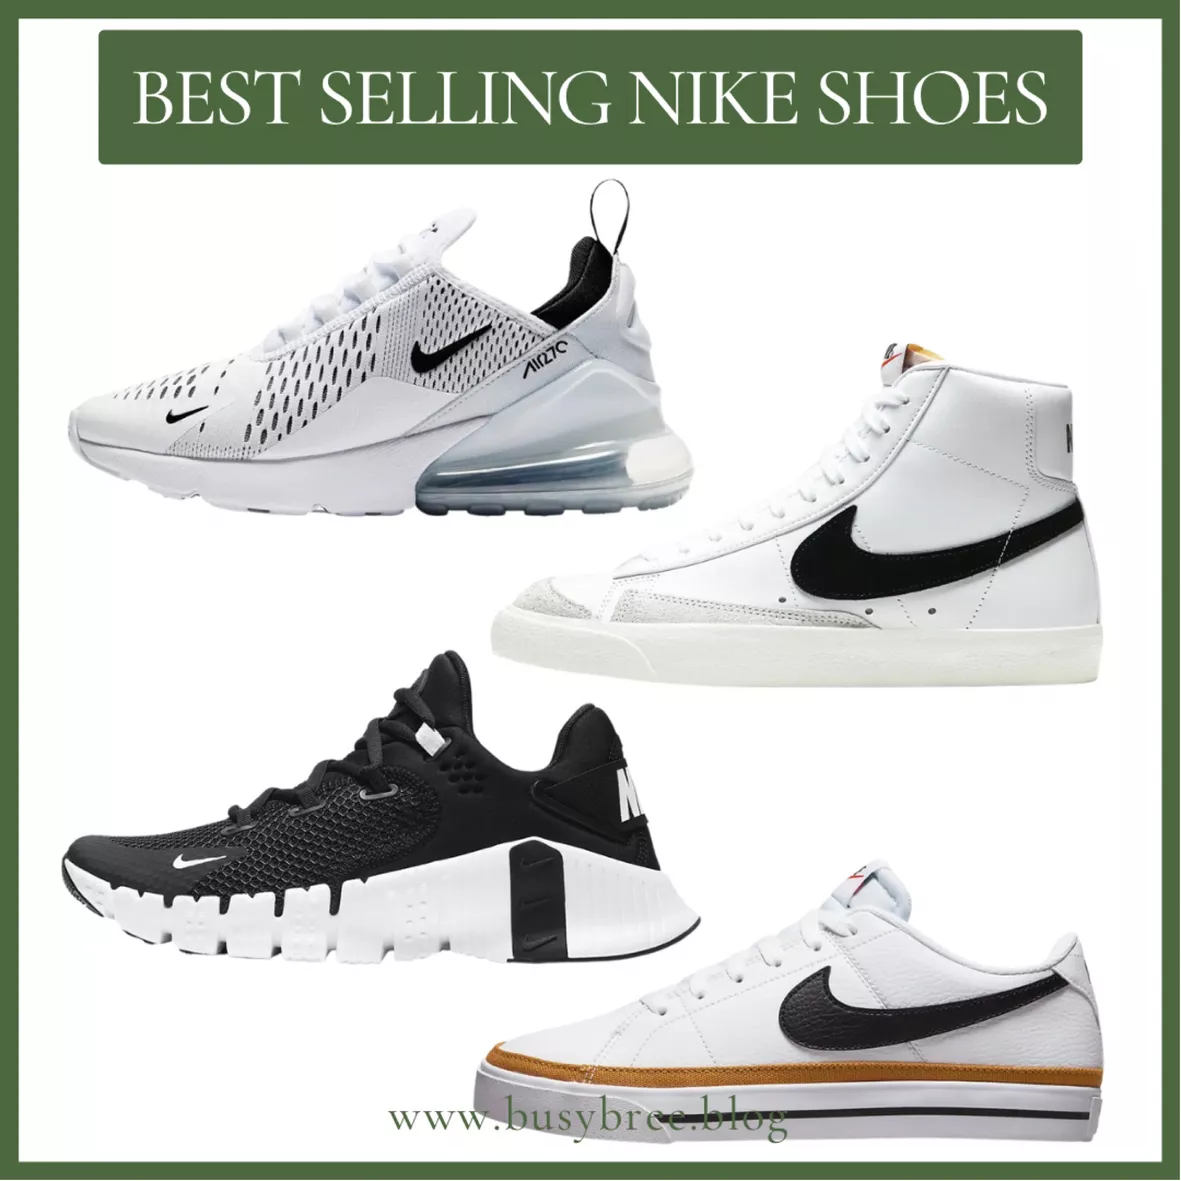 Best-Selling Training Shoes.